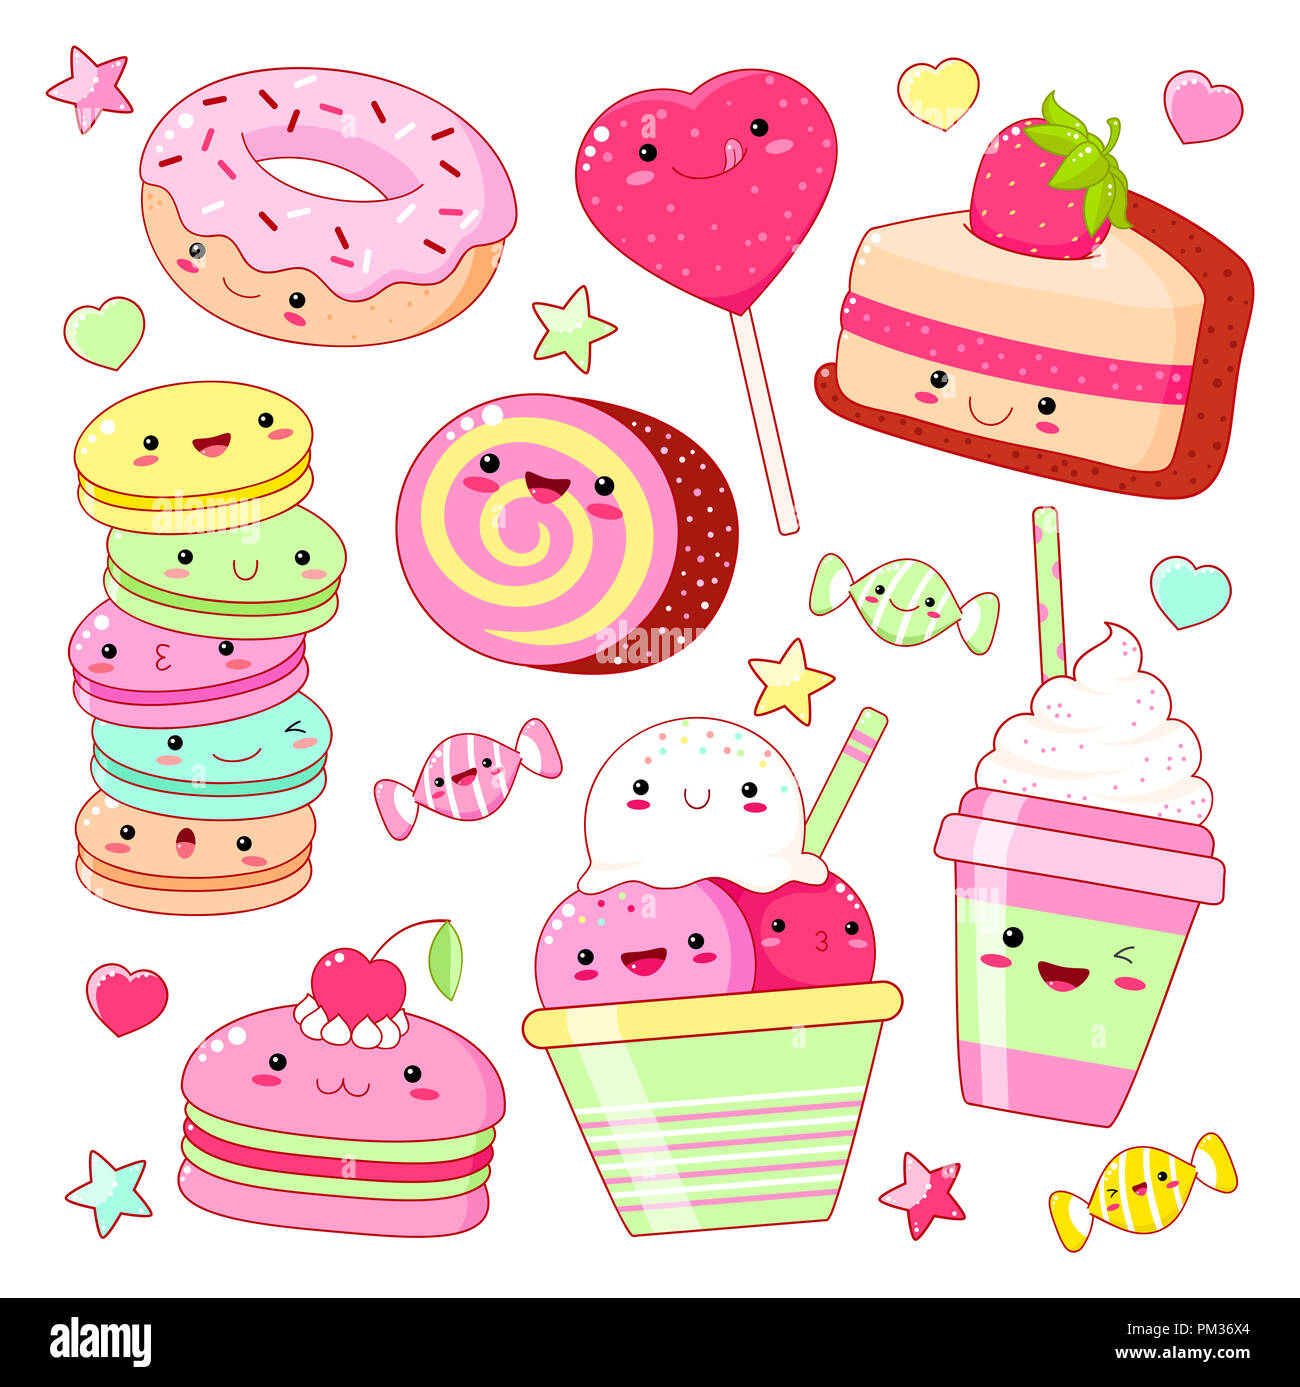 https://c8.alamy.com/comp/PM36X4/set-of-cute-sweet-icons-in-kawaii-style-with-smiling-face-and-pink-cheeks-for-sweet-design-sticker-with-inscription-so-cute-ice-cream-candy-donut-PM36X4.jpg